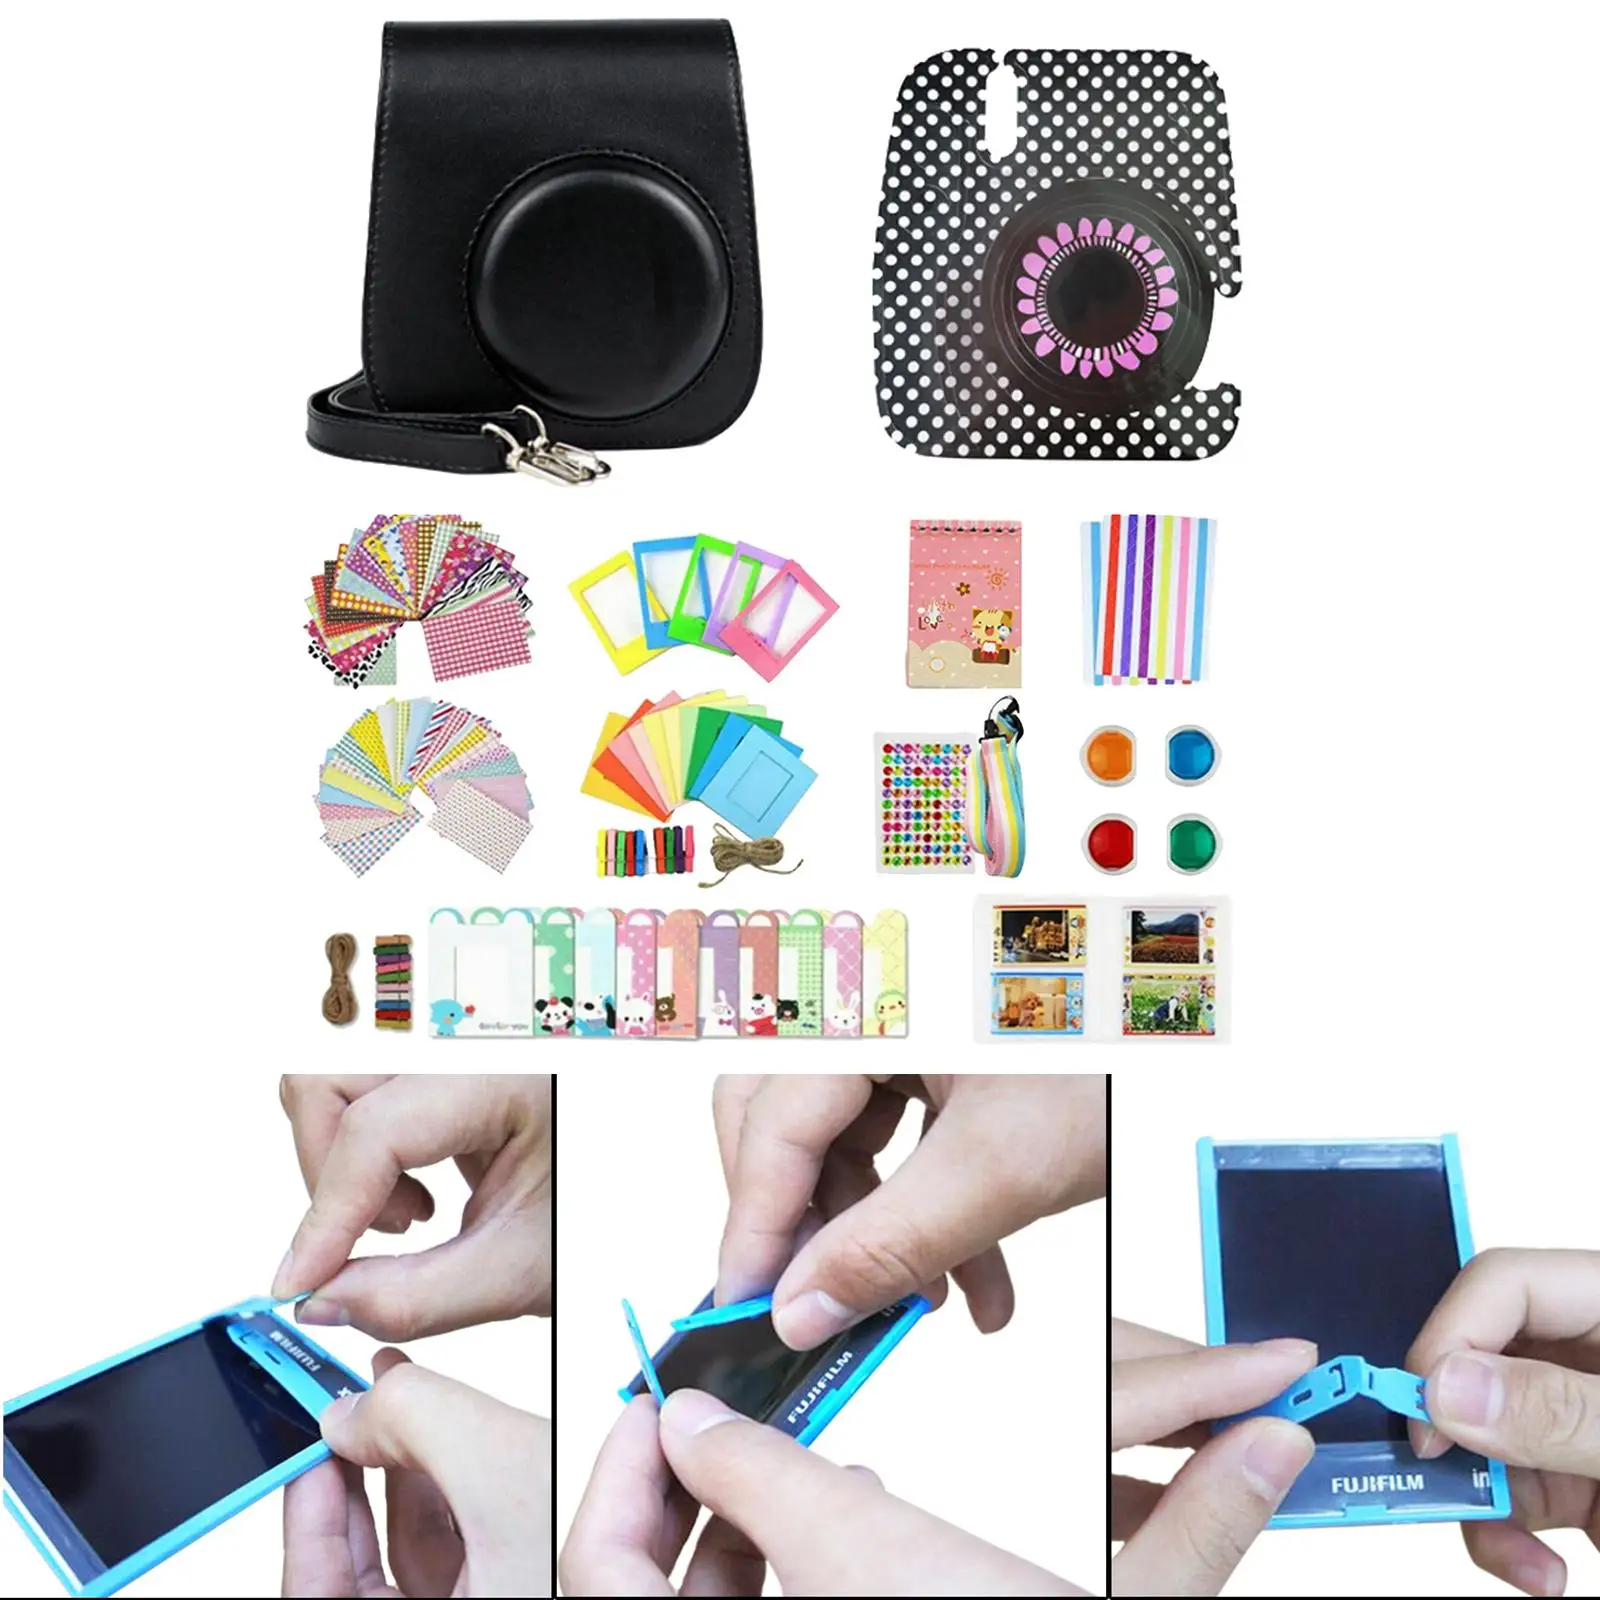 13 in 1 Camera Accessory Bundles for 11, with PU Leather Case, Filter, Photo Album, Sticker And